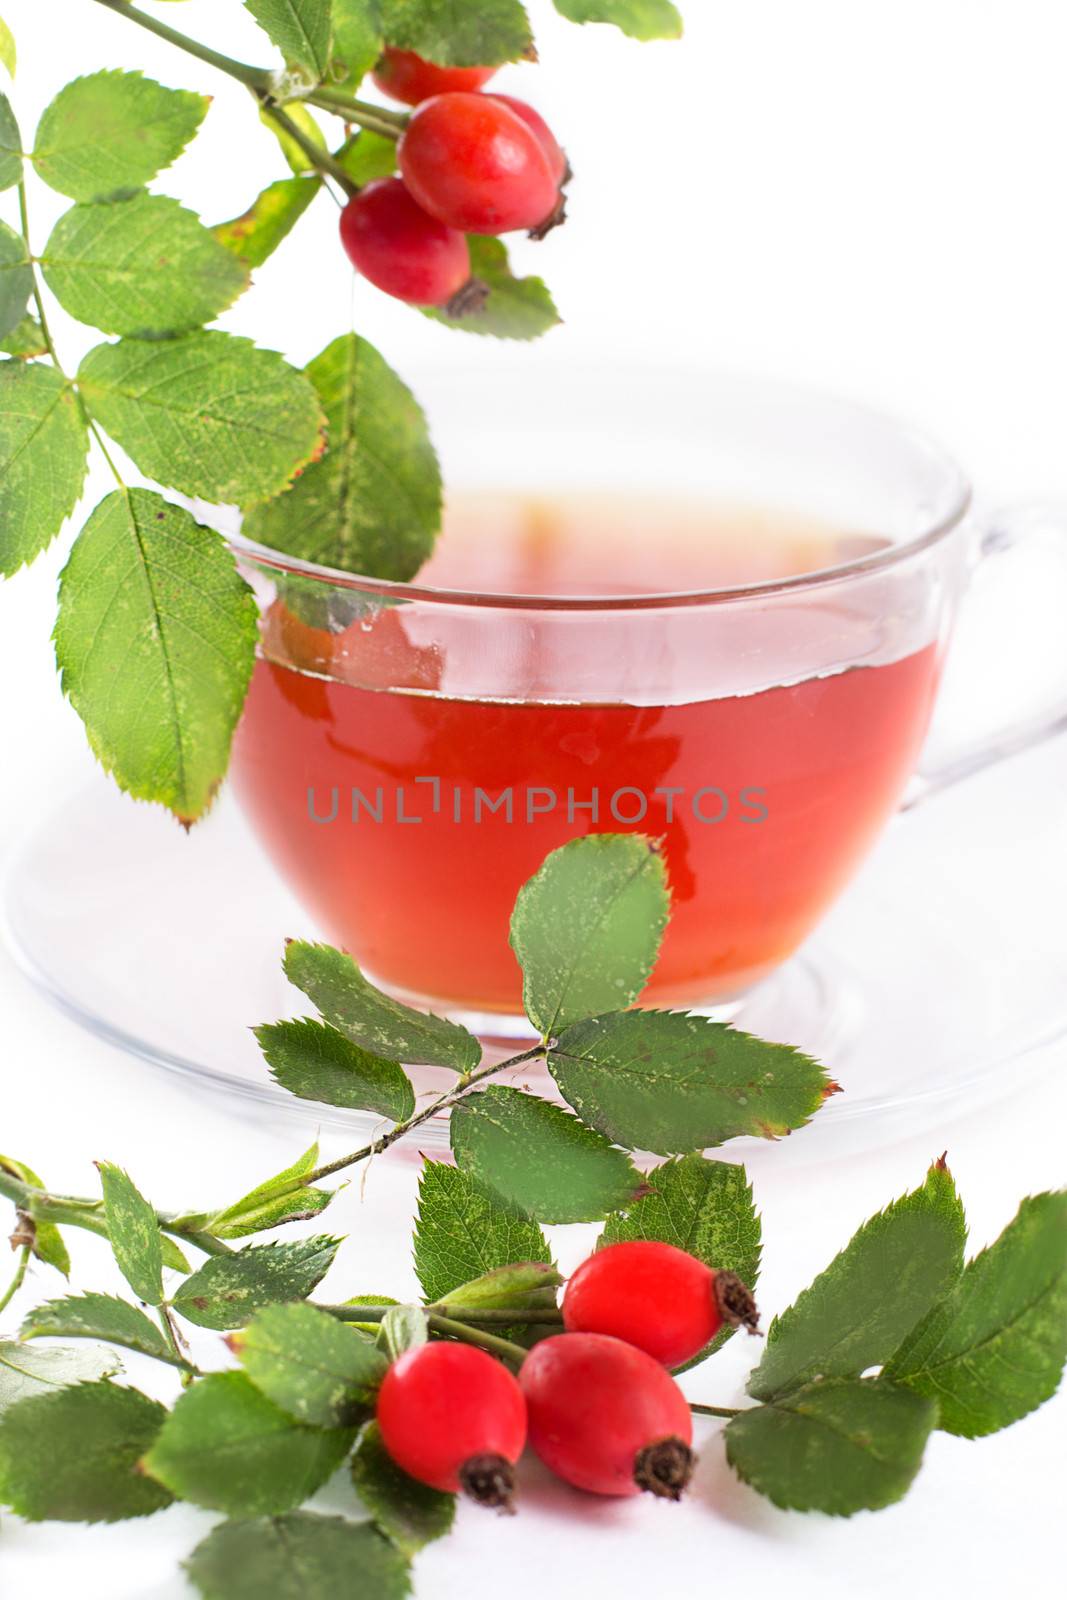 Cup of rose hip tea and berries over white